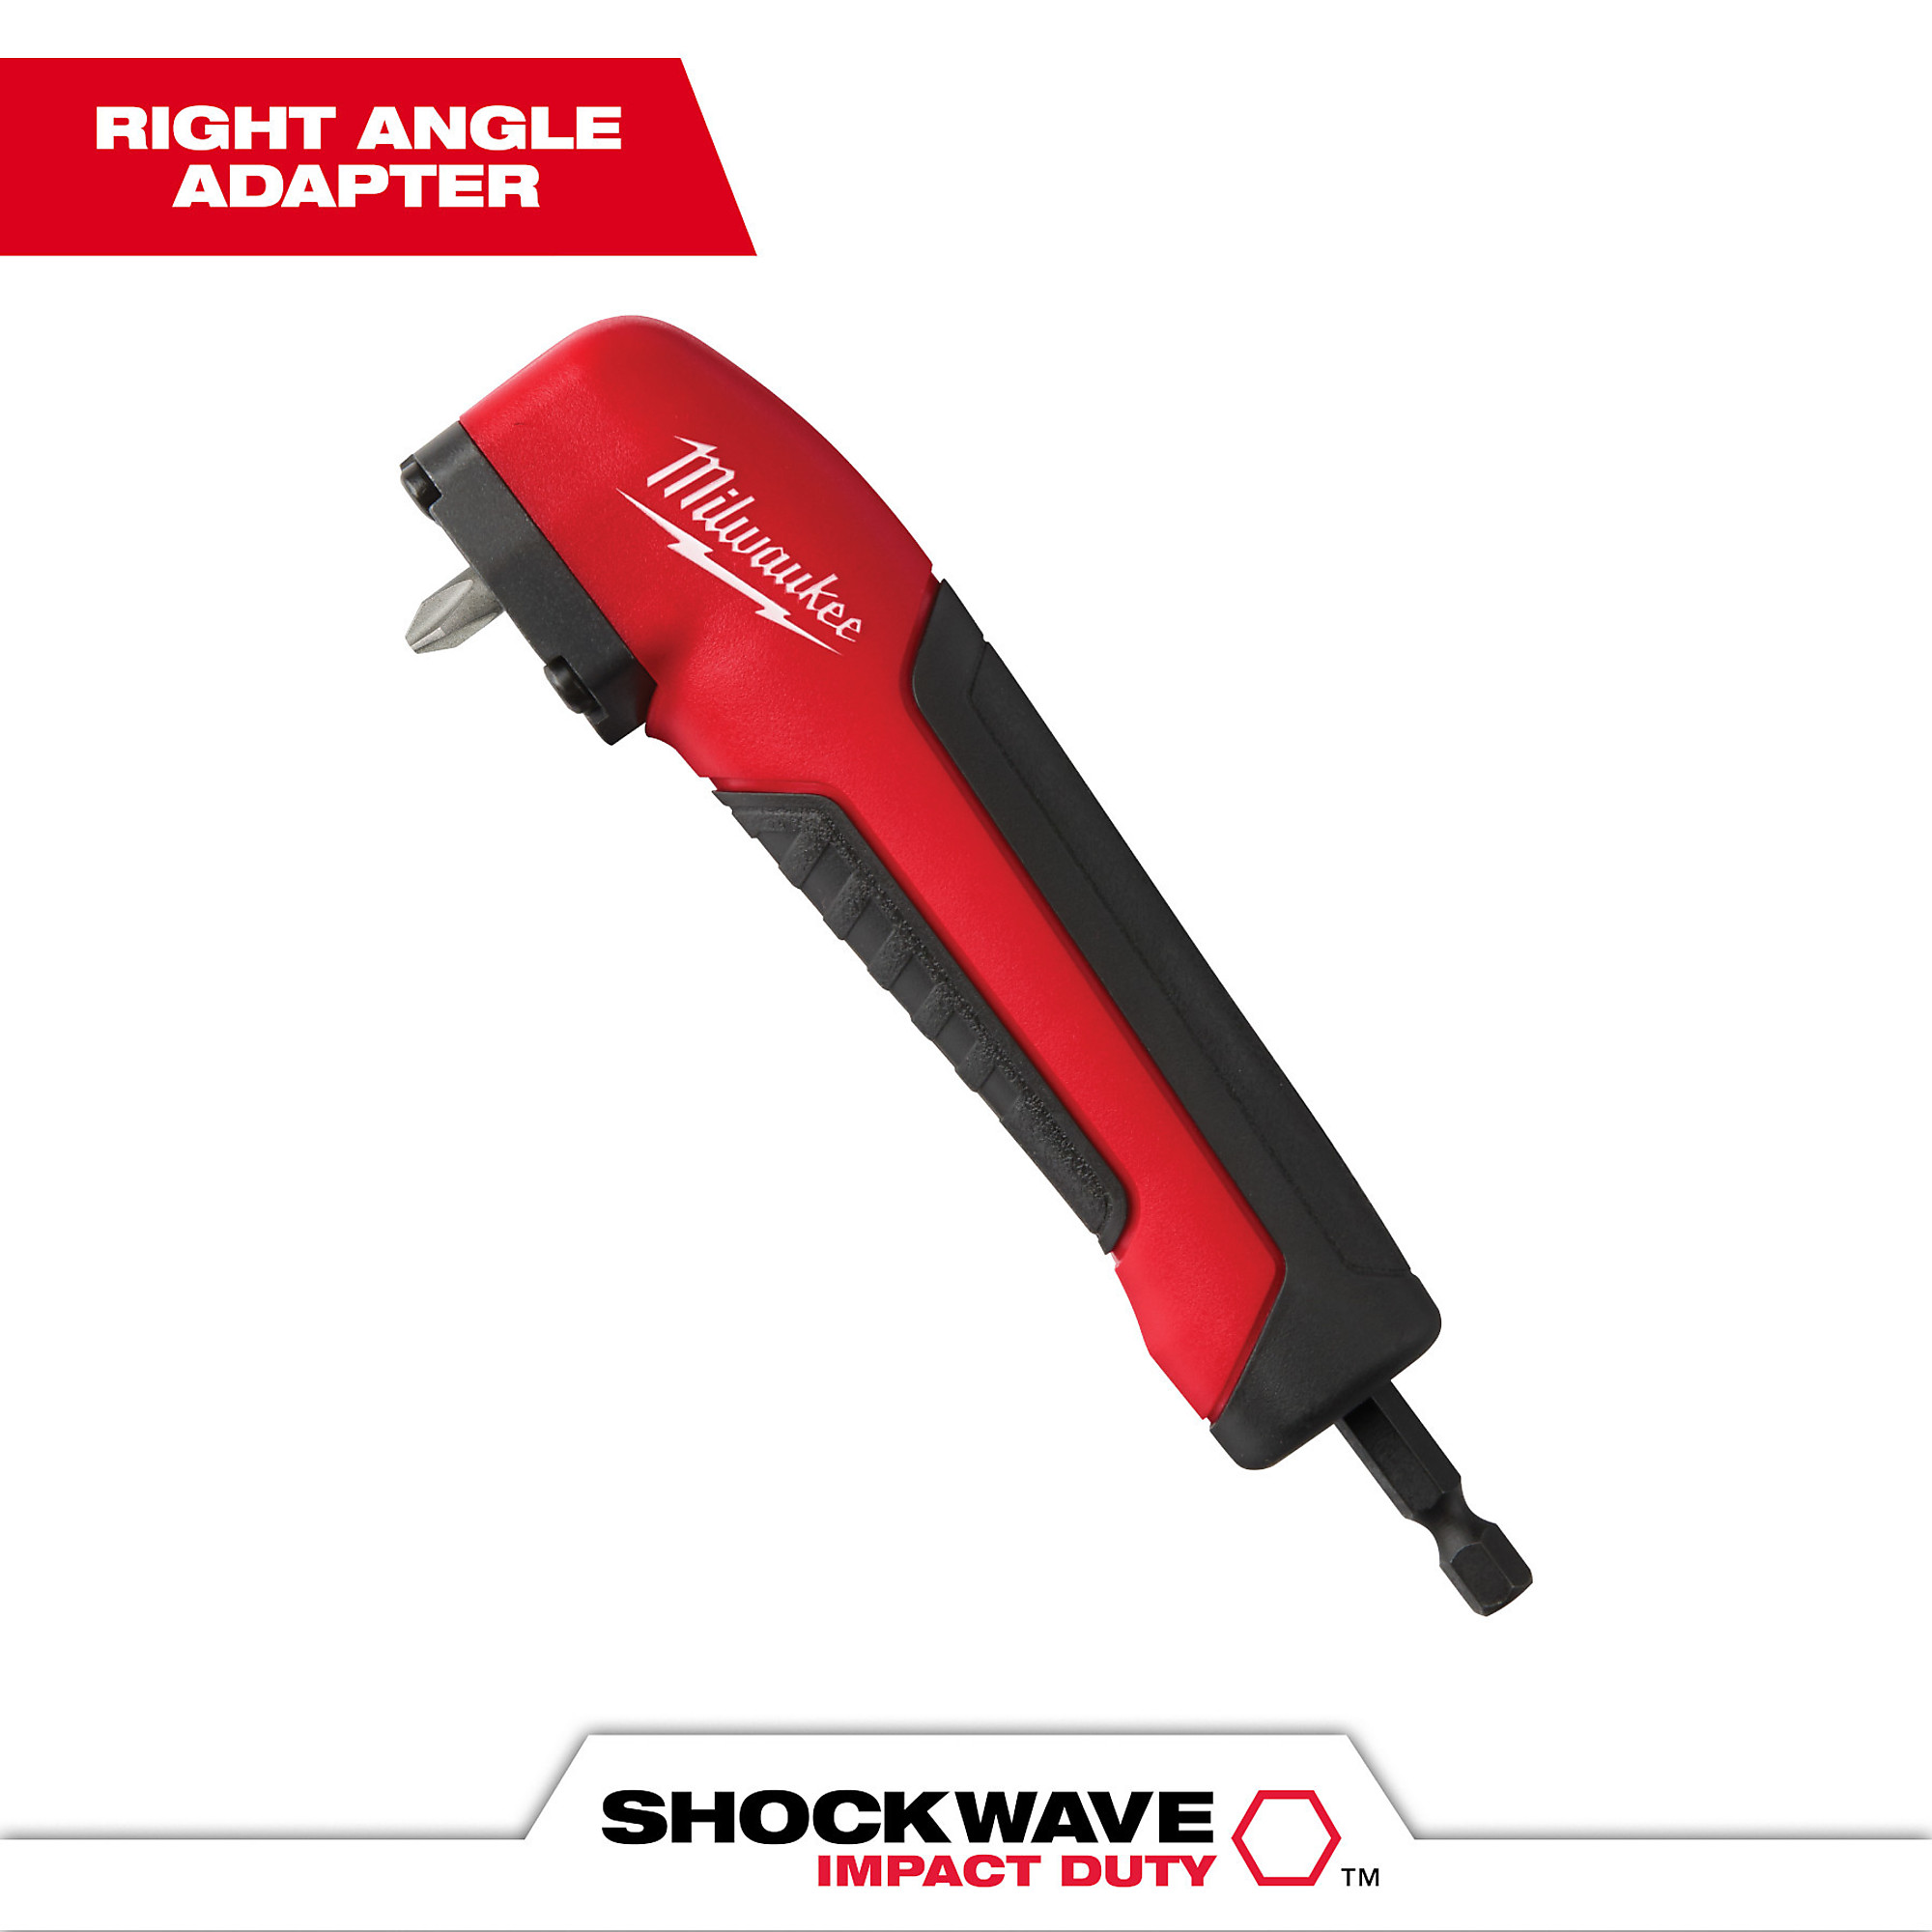 Milwaukee Shockwave Right Angle Adapter, Model 48-32-2390